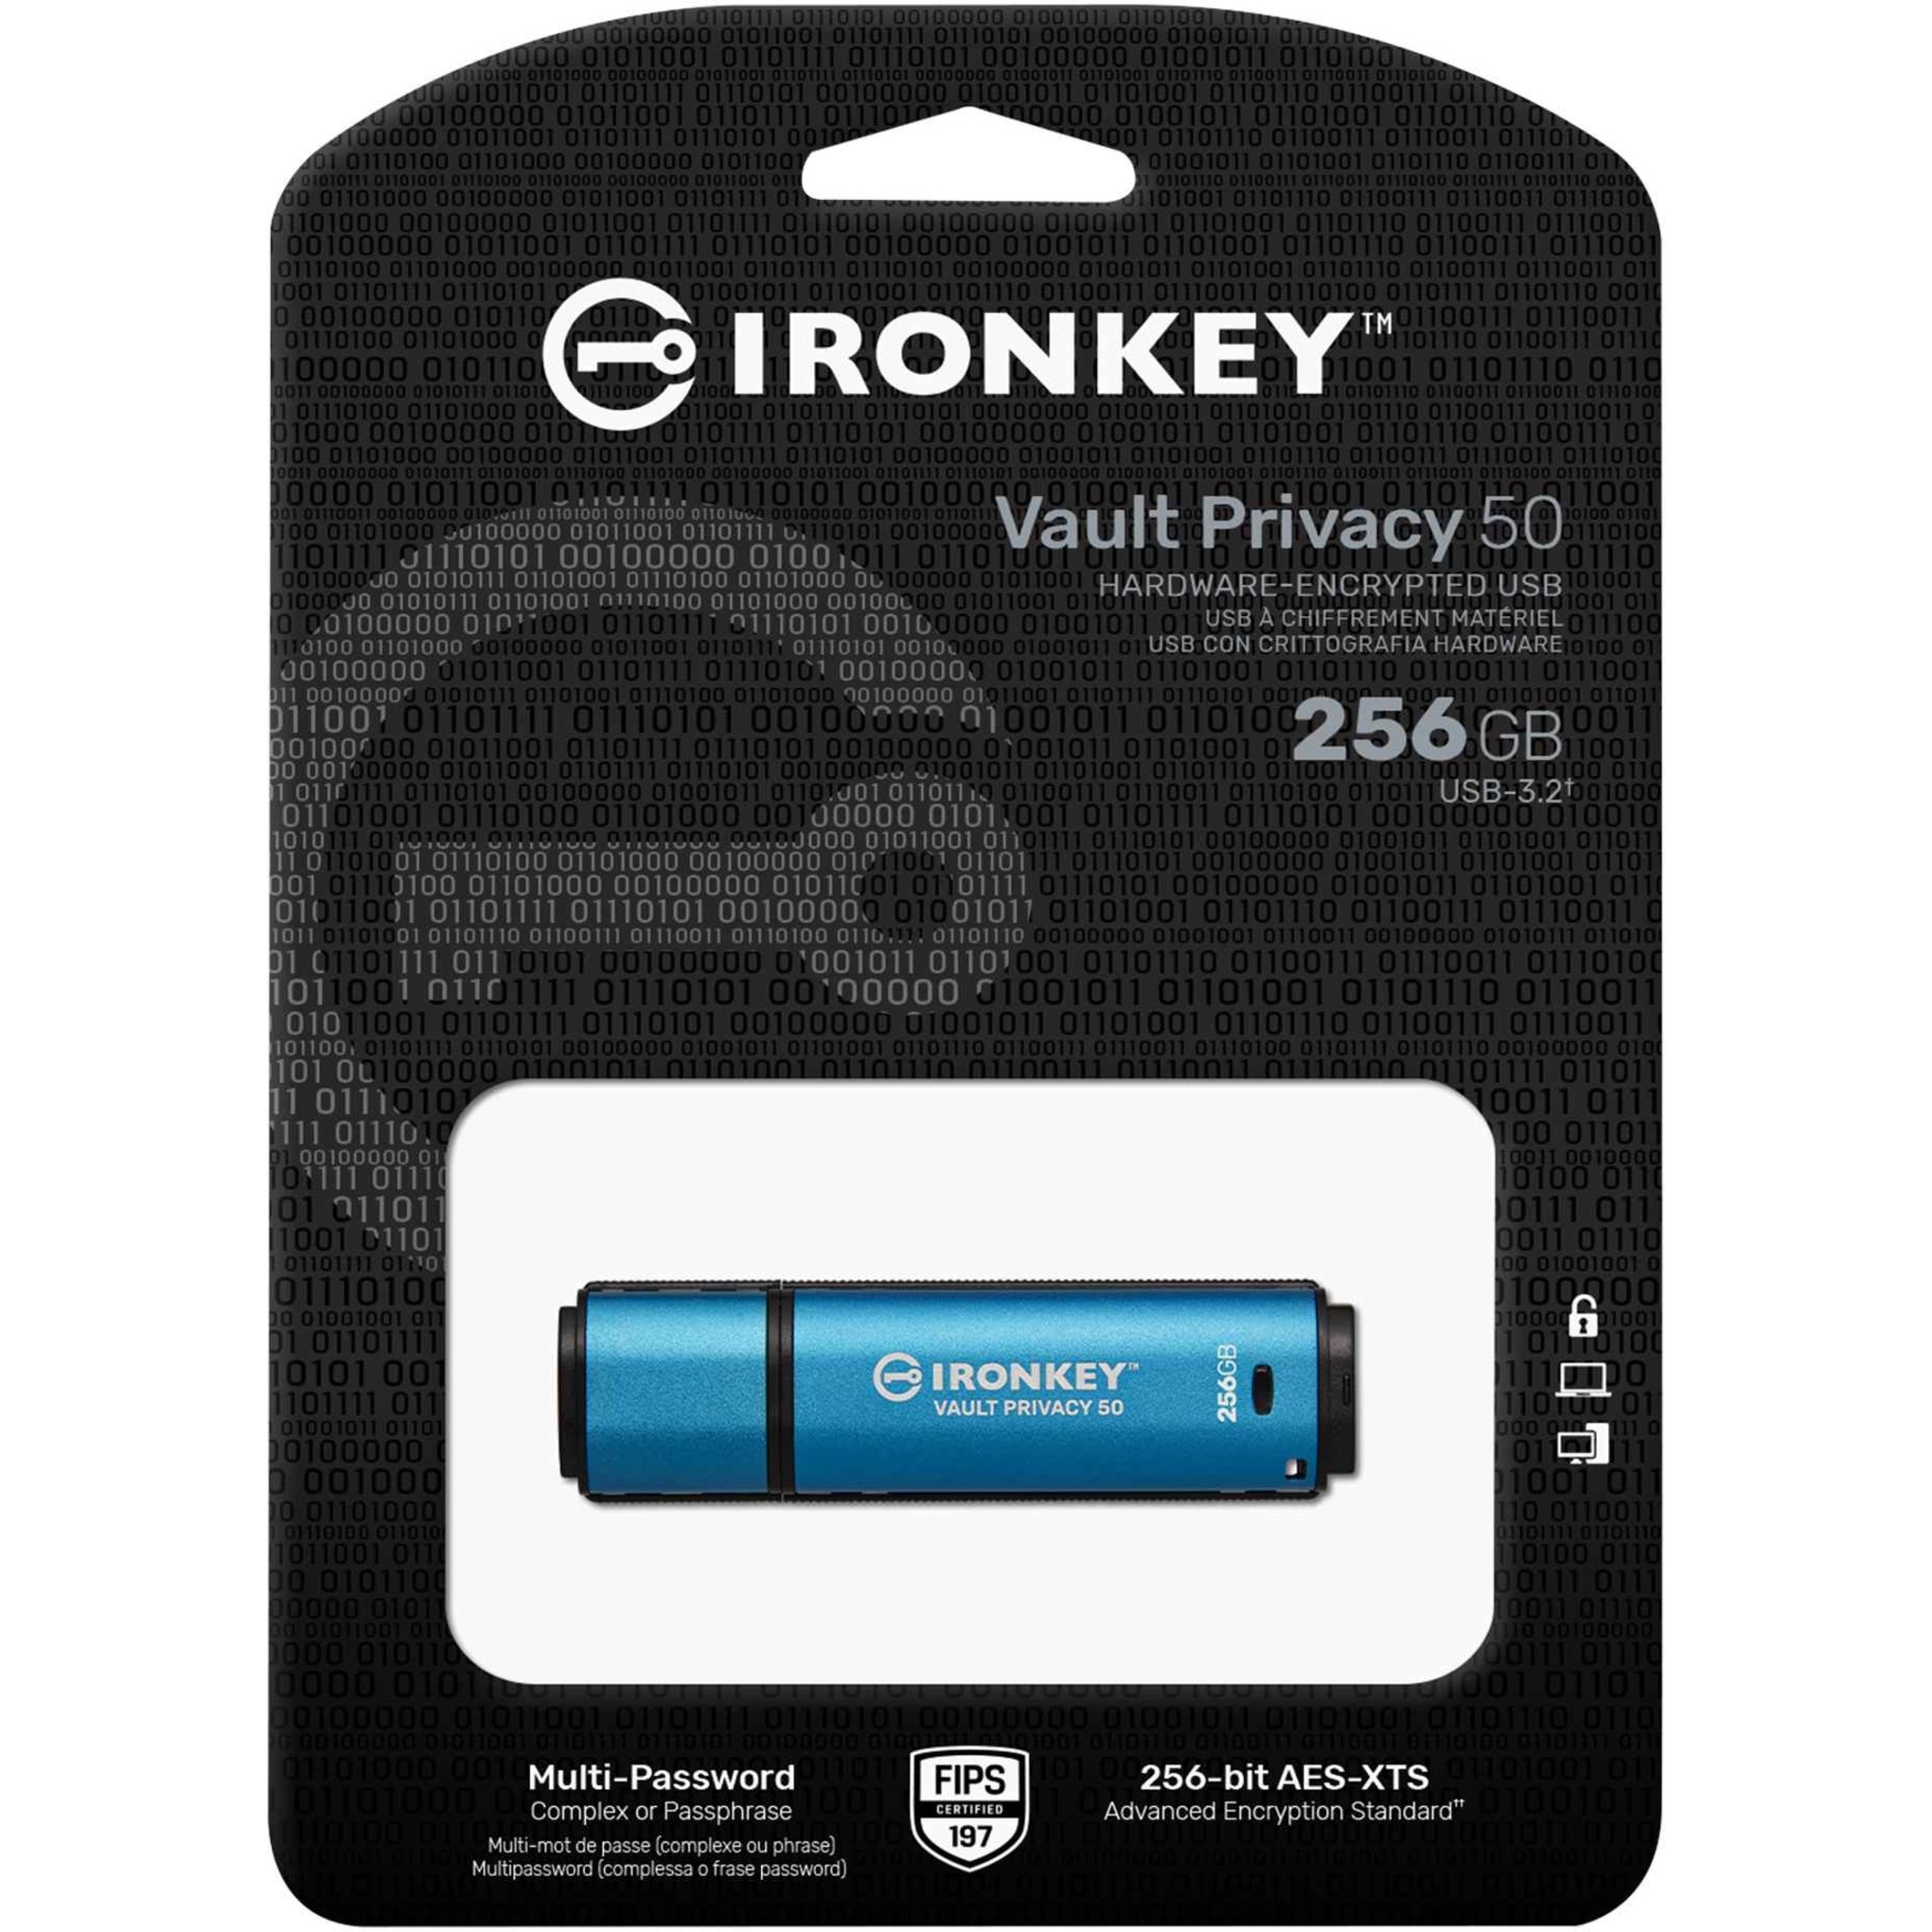 IronKey Vault Privacy 50 Series 256GB USB 3.2 (Gen 1) Type A Flash Drive - image 4 of 9